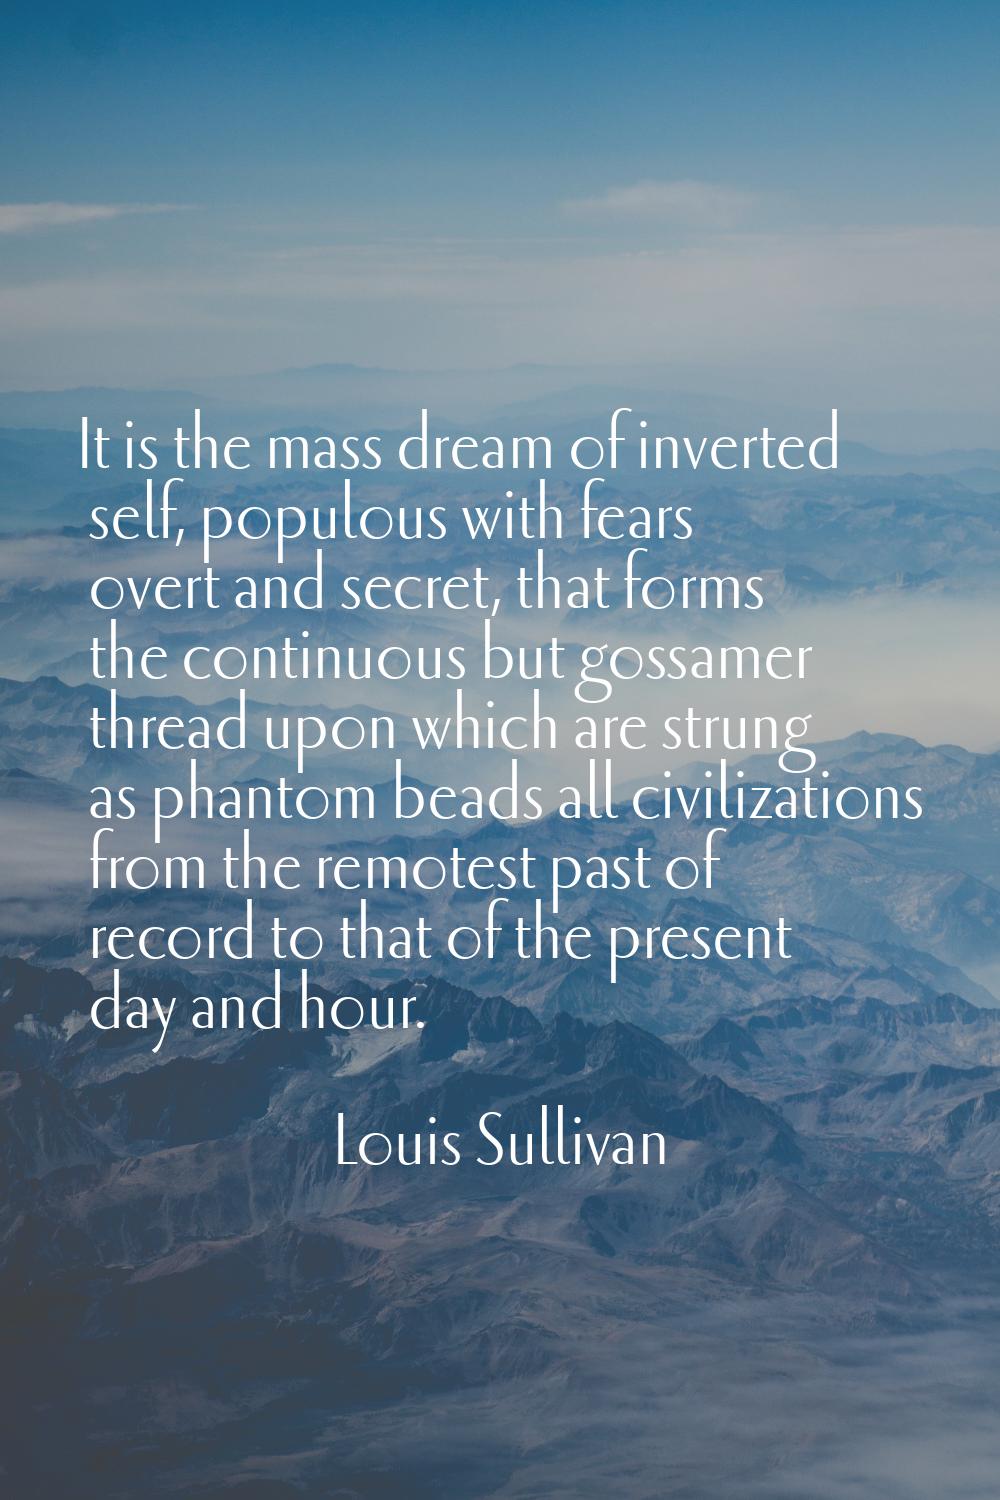 It is the mass dream of inverted self, populous with fears overt and secret, that forms the continu